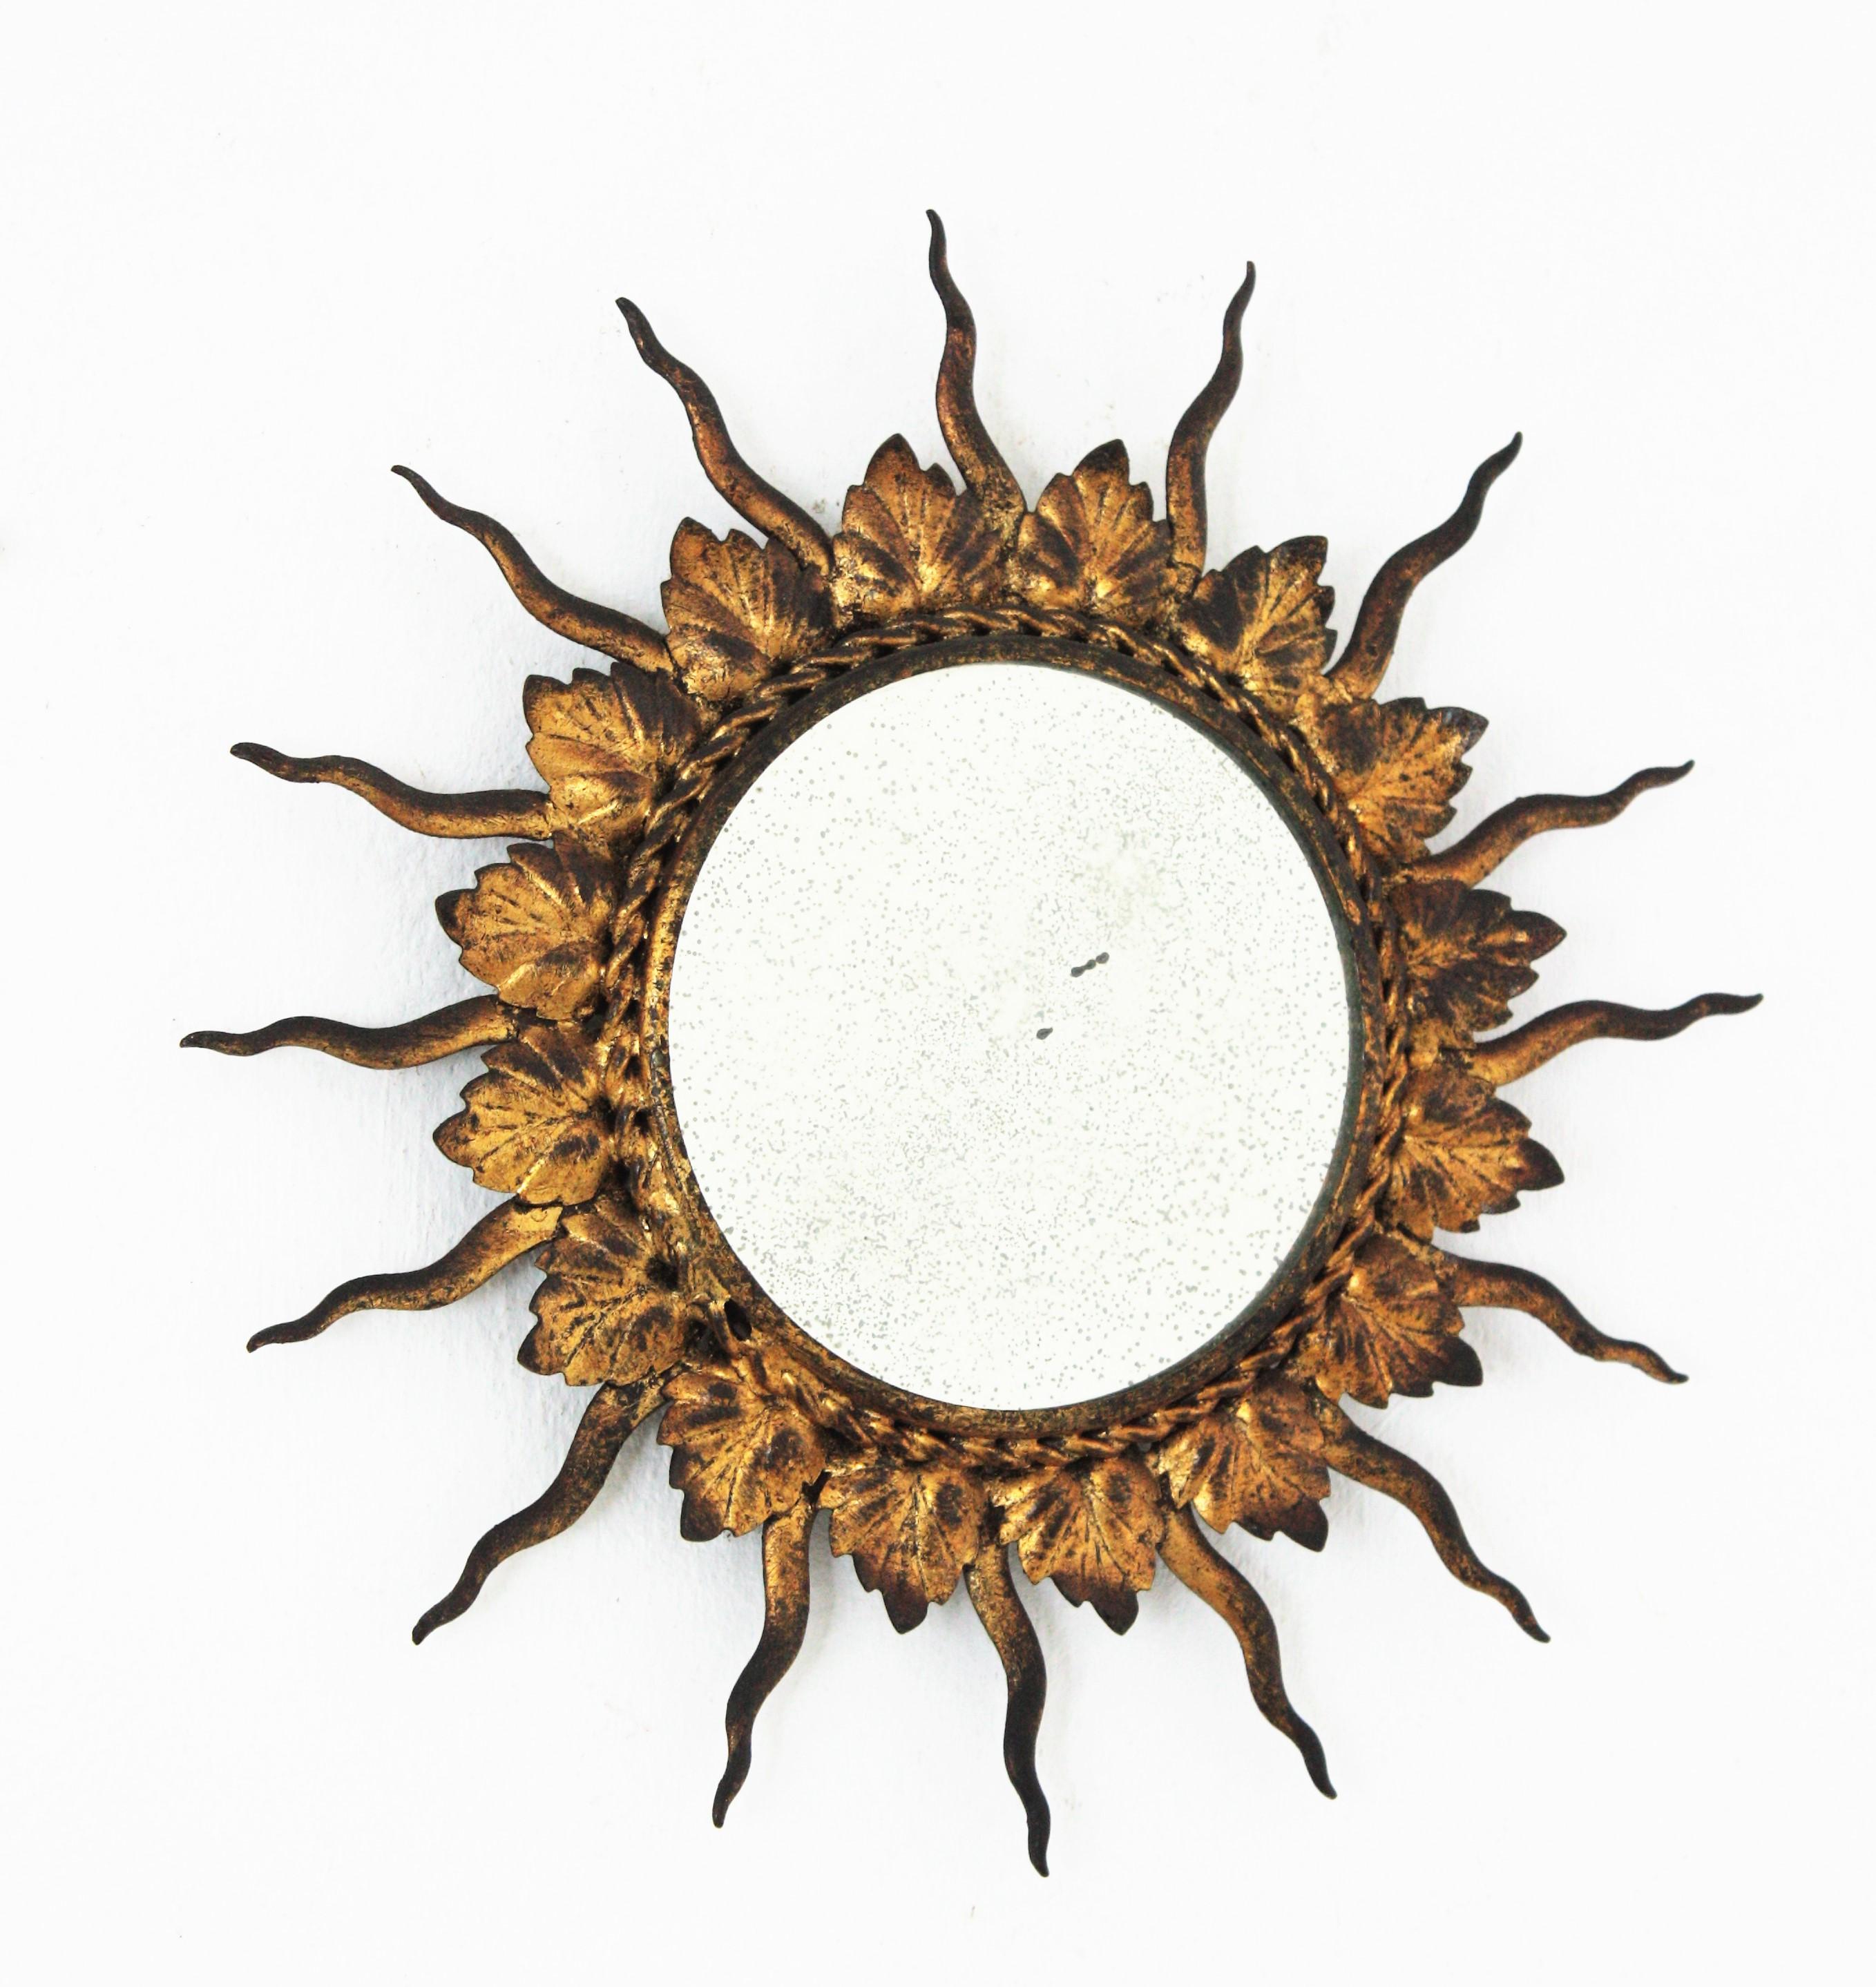 Mini sized sunburst mirror in gilt iron. France, 1960s
Lovely handcrafted gilt iron mini sunburst mirror. The frame is comprised by alternating iron leaves and rays finished with gold leaf gilding.
Unusual piece due to its small size.
Beautiful